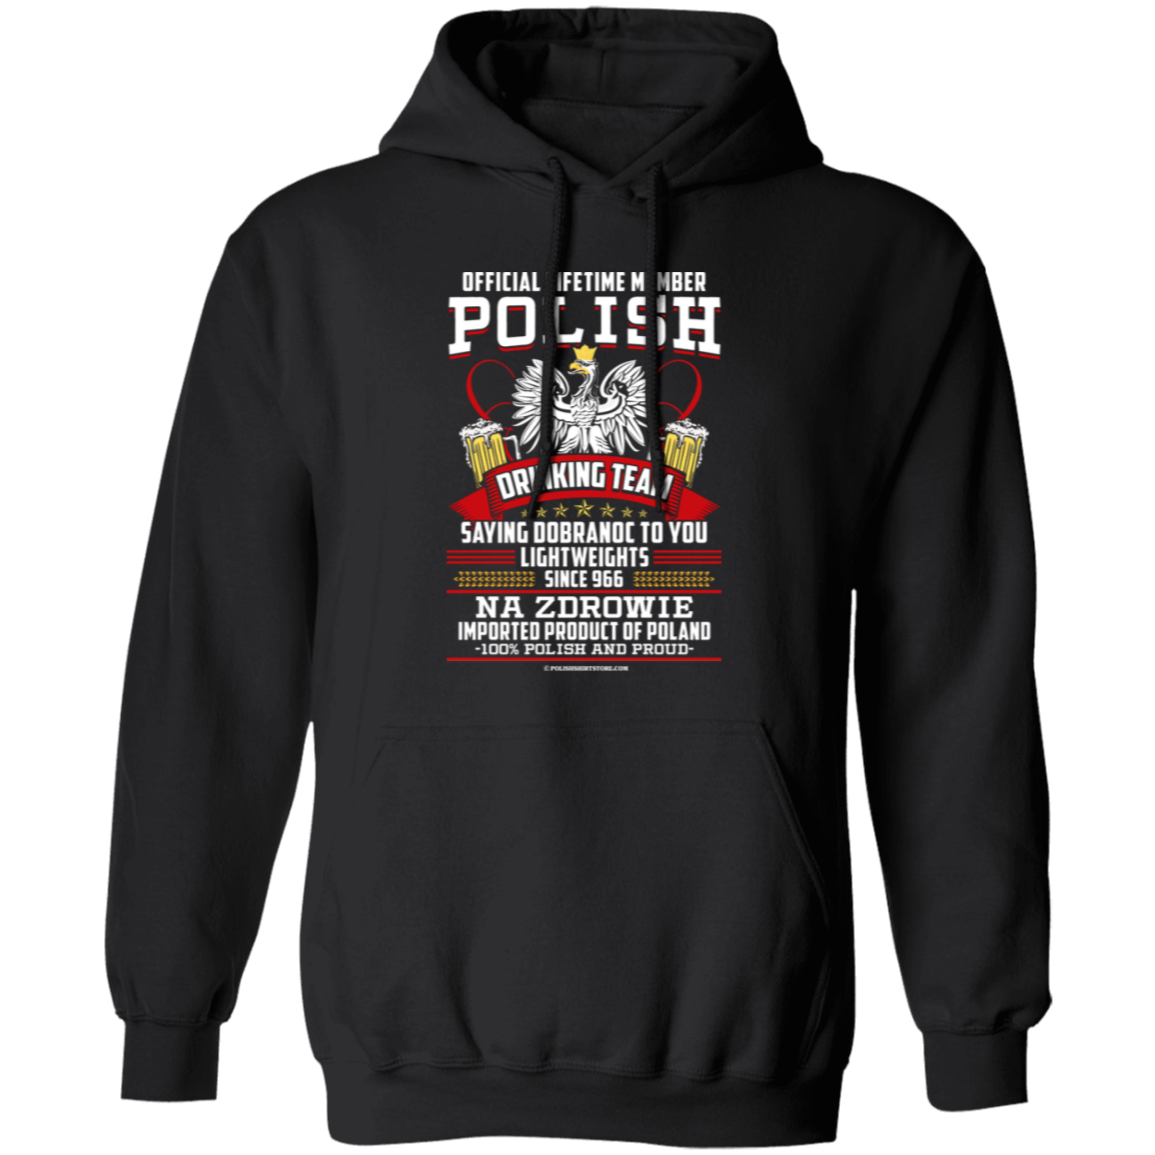 Polish Drinking Team Saying Dobranoc To You Lightweights Since 966 Apparel CustomCat G185 Pullover Hoodie Black S